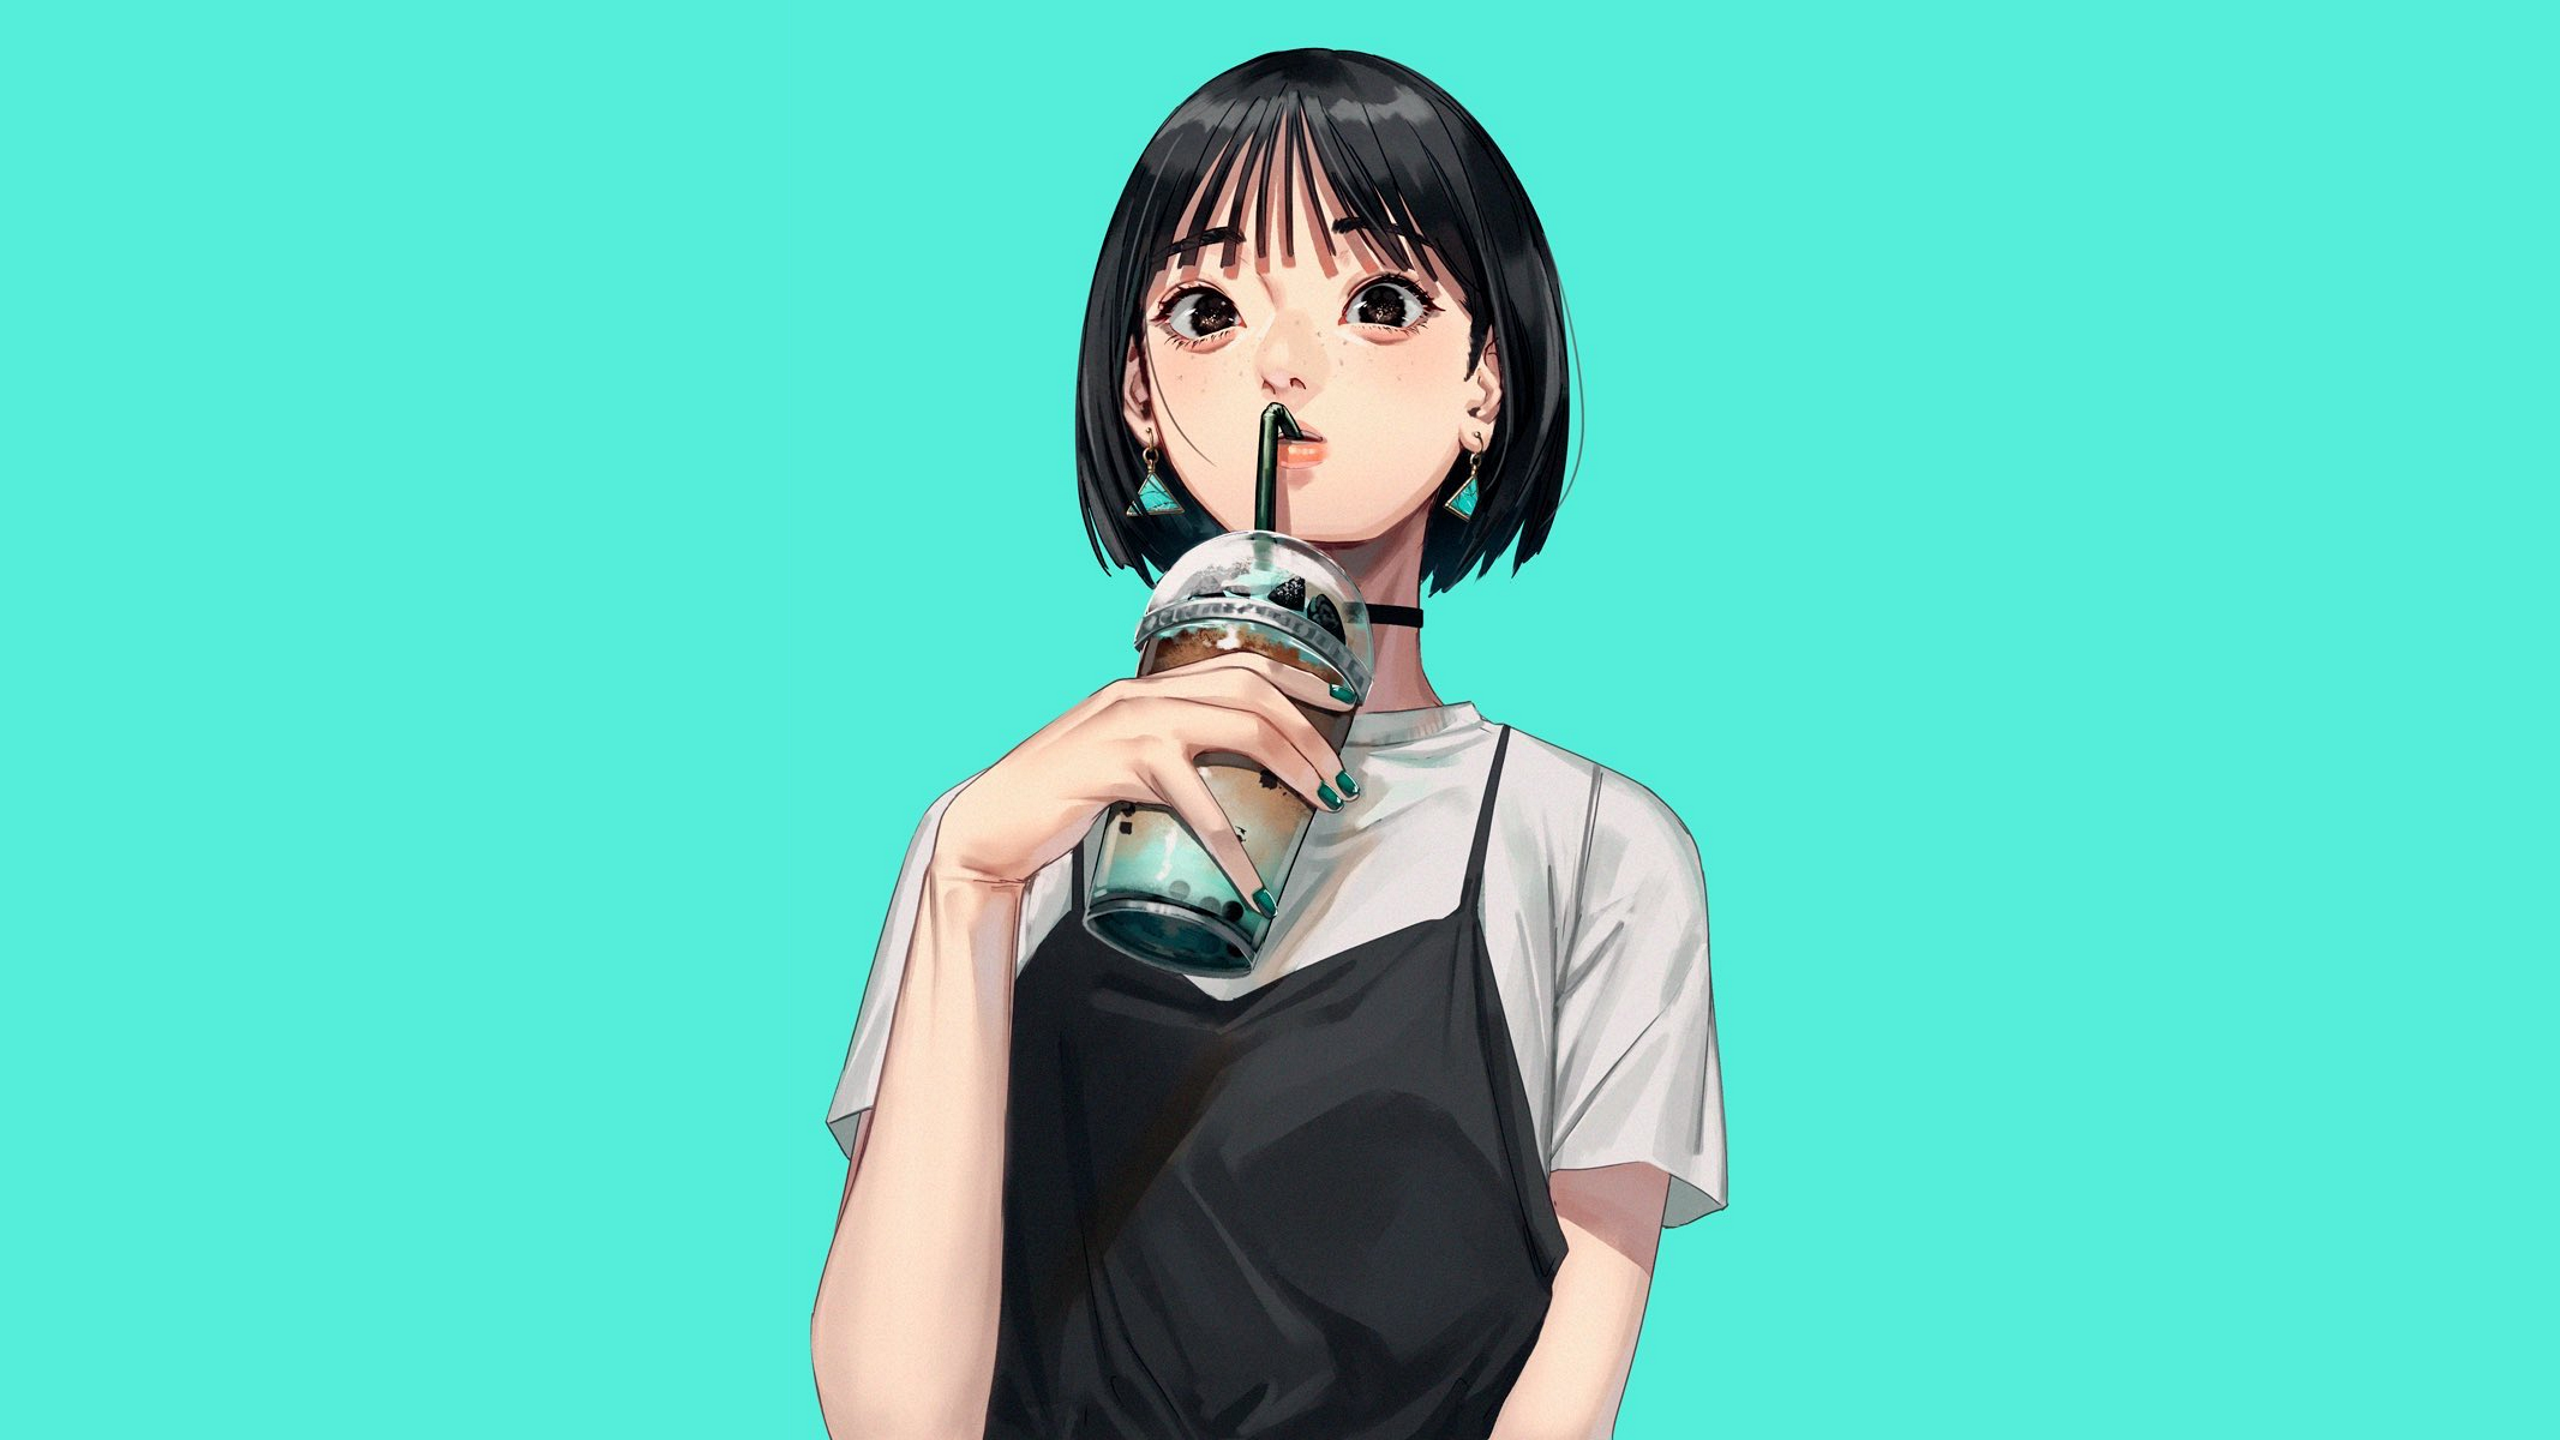 Anime Anime Girls Green Nails Black Hair Short Hair Brown Eyes Drinking  Earring Looking At Viewer Cy Wallpaper - Resolution:2560x1440 - ID:1230567  